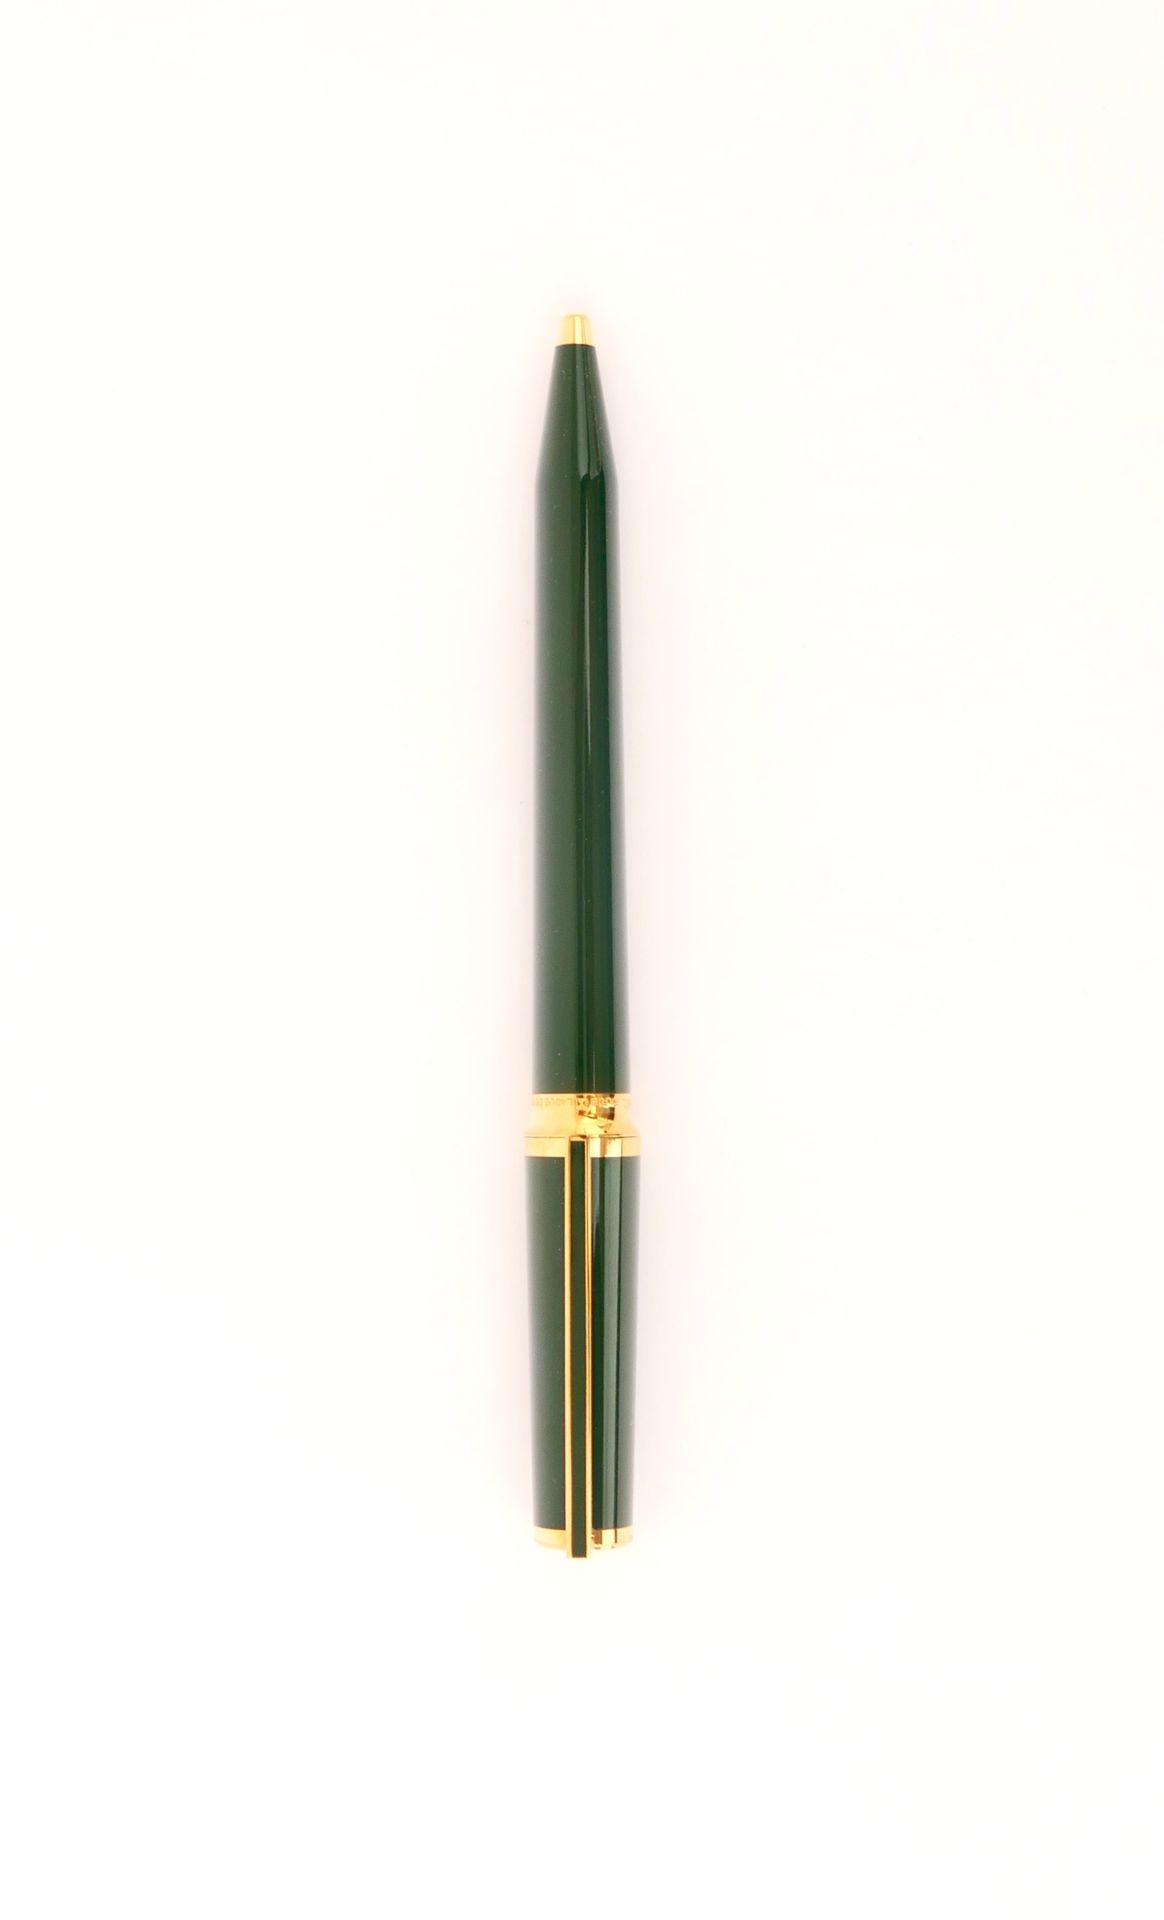 Null S.T. DUPONT 

Montparnasse 

Ballpoint pen in gilded metal and green lacque&hellip;